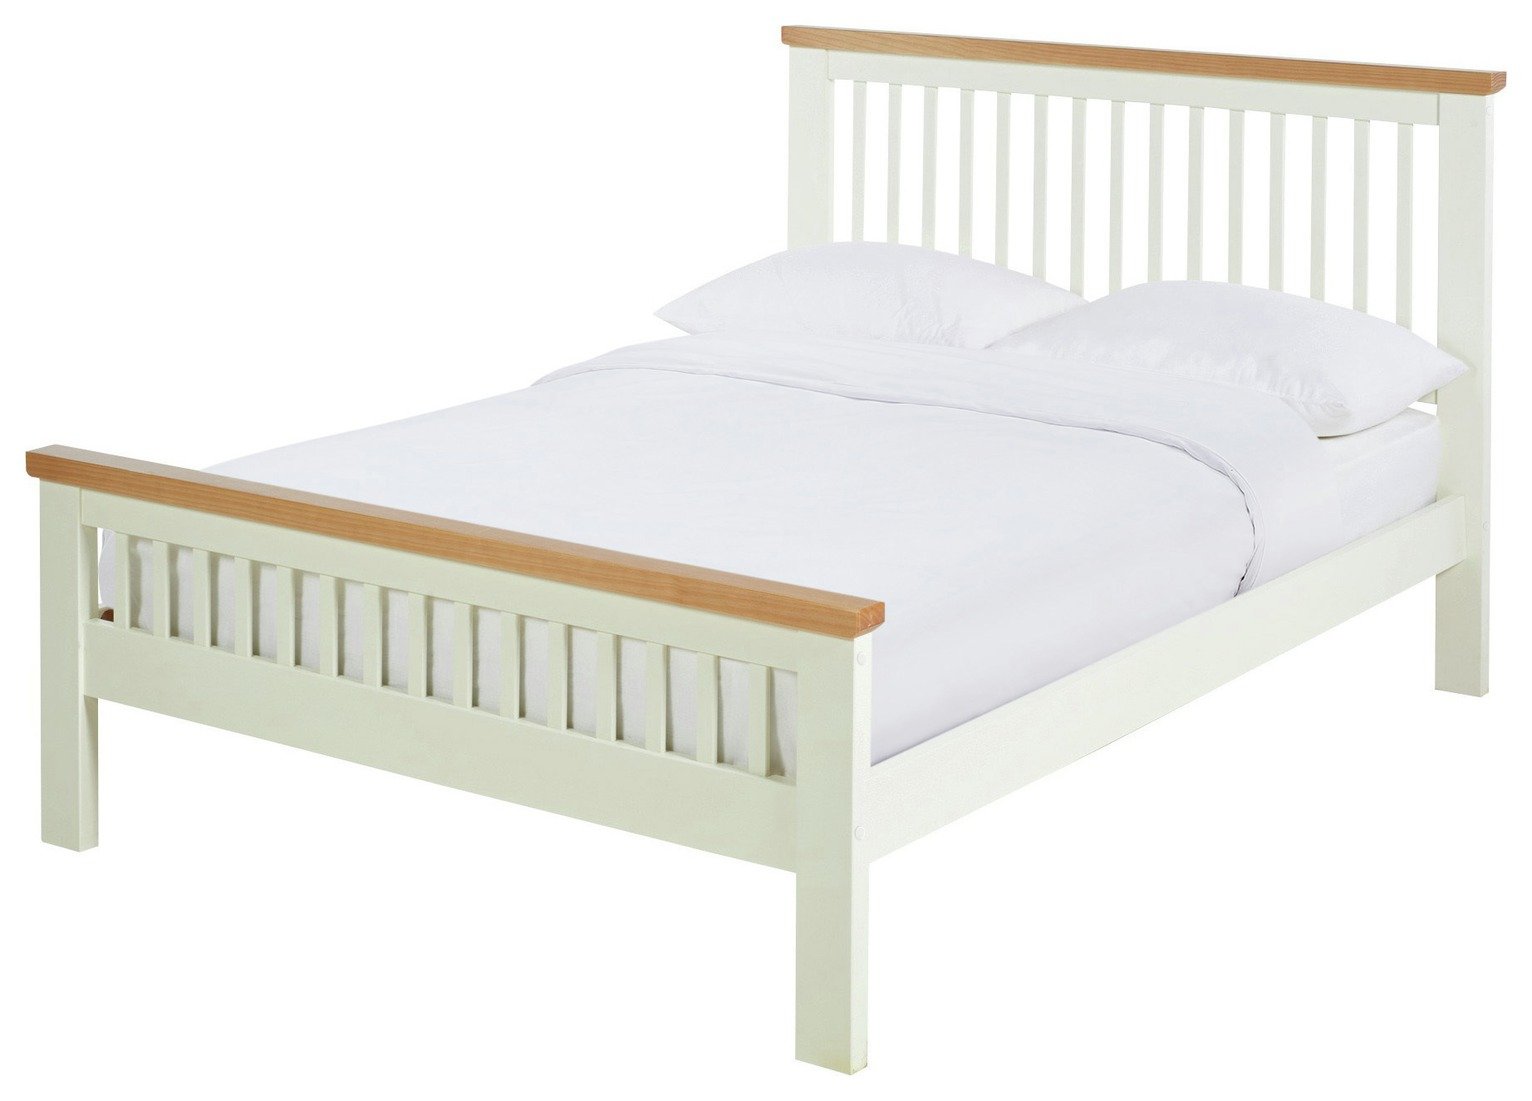 Ion Argos Home Aubrey Superking Wooden Bed Frame - Two Tone Oak And Cream Super King